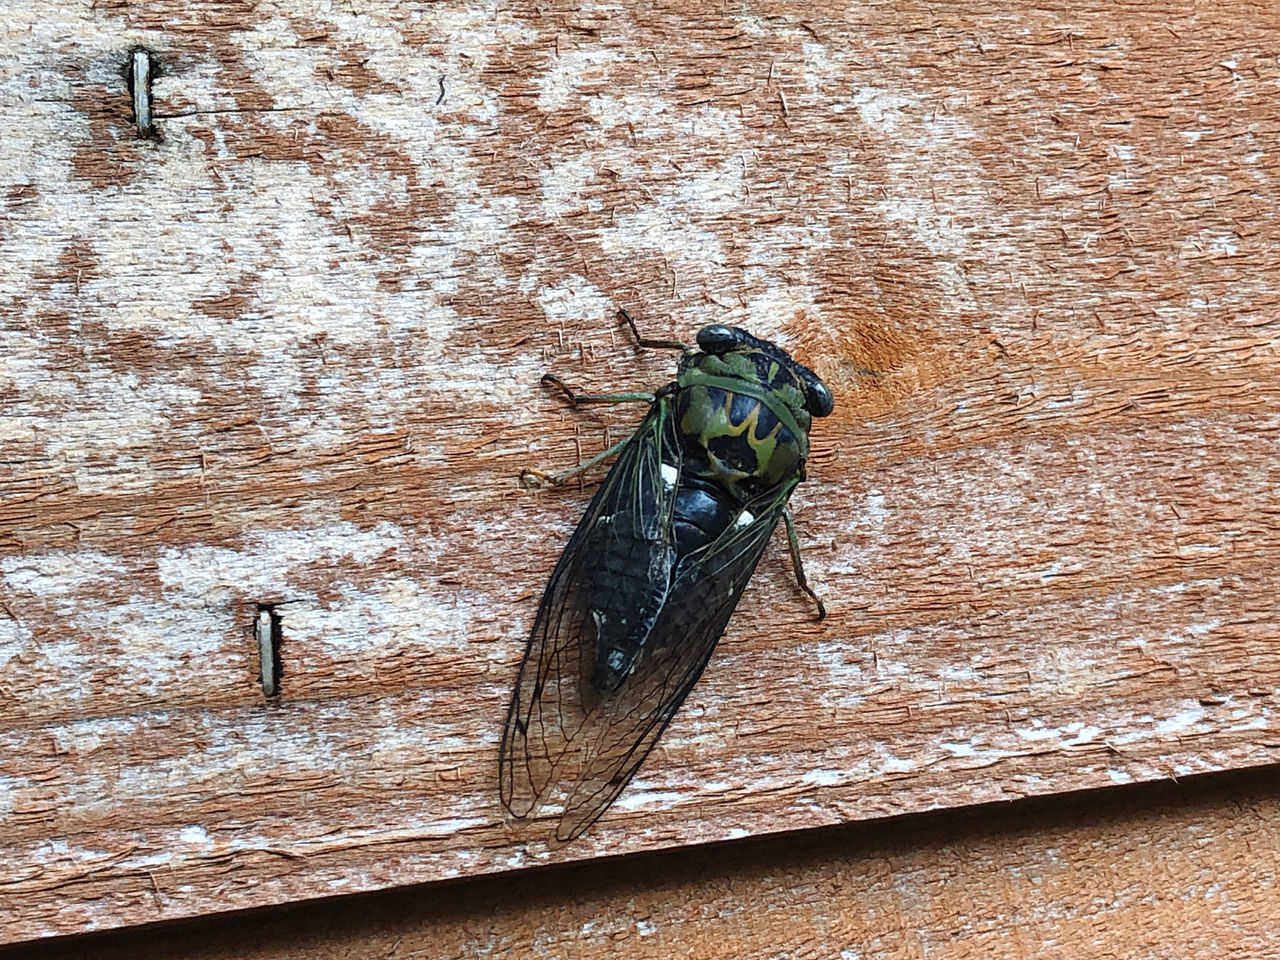 HIGH ANGLE VIEW OF FLY ON WOODEN TABLE